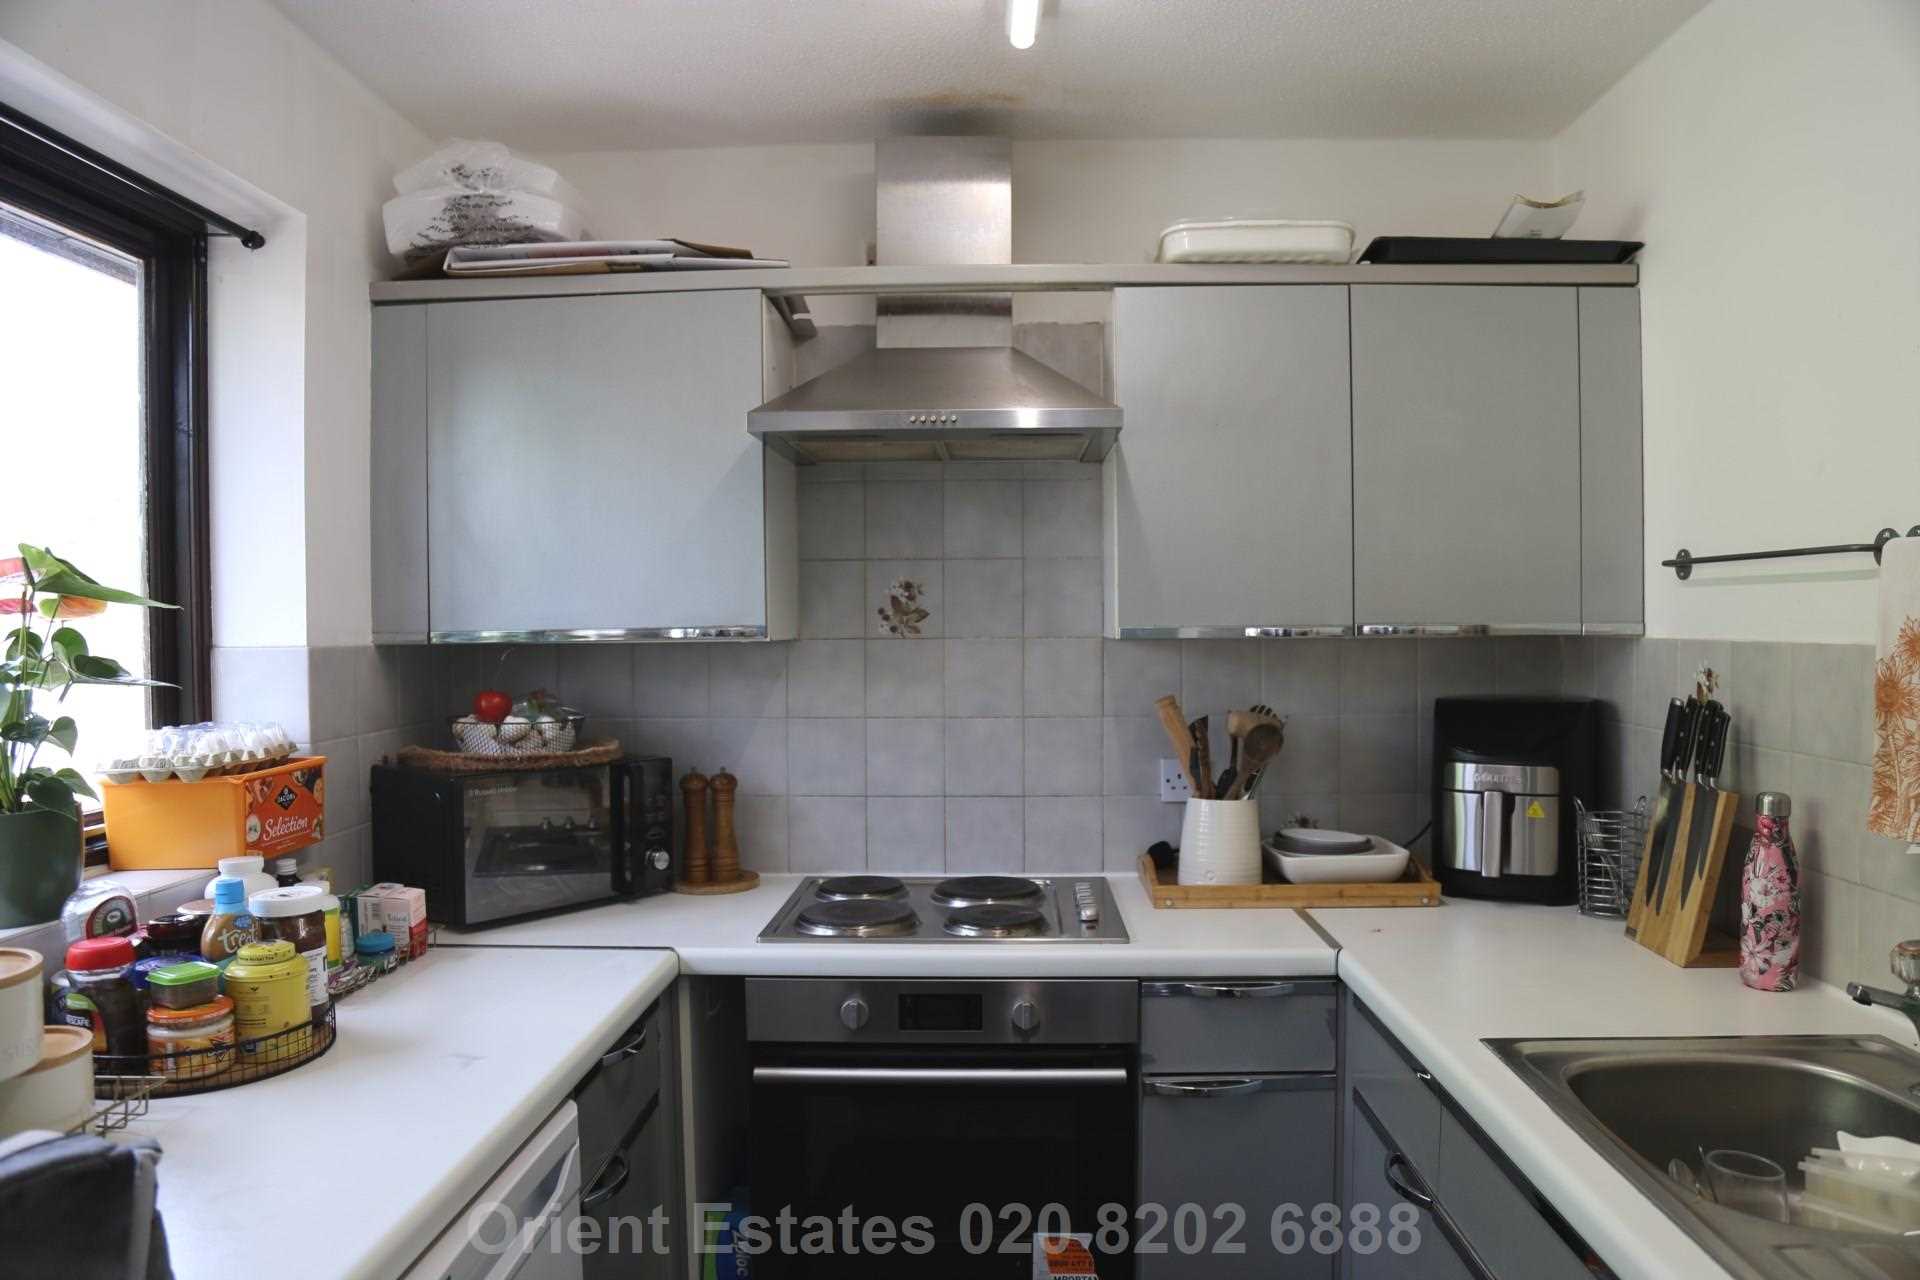 Curlew Court, Magpie Close, Colindale, Image 2